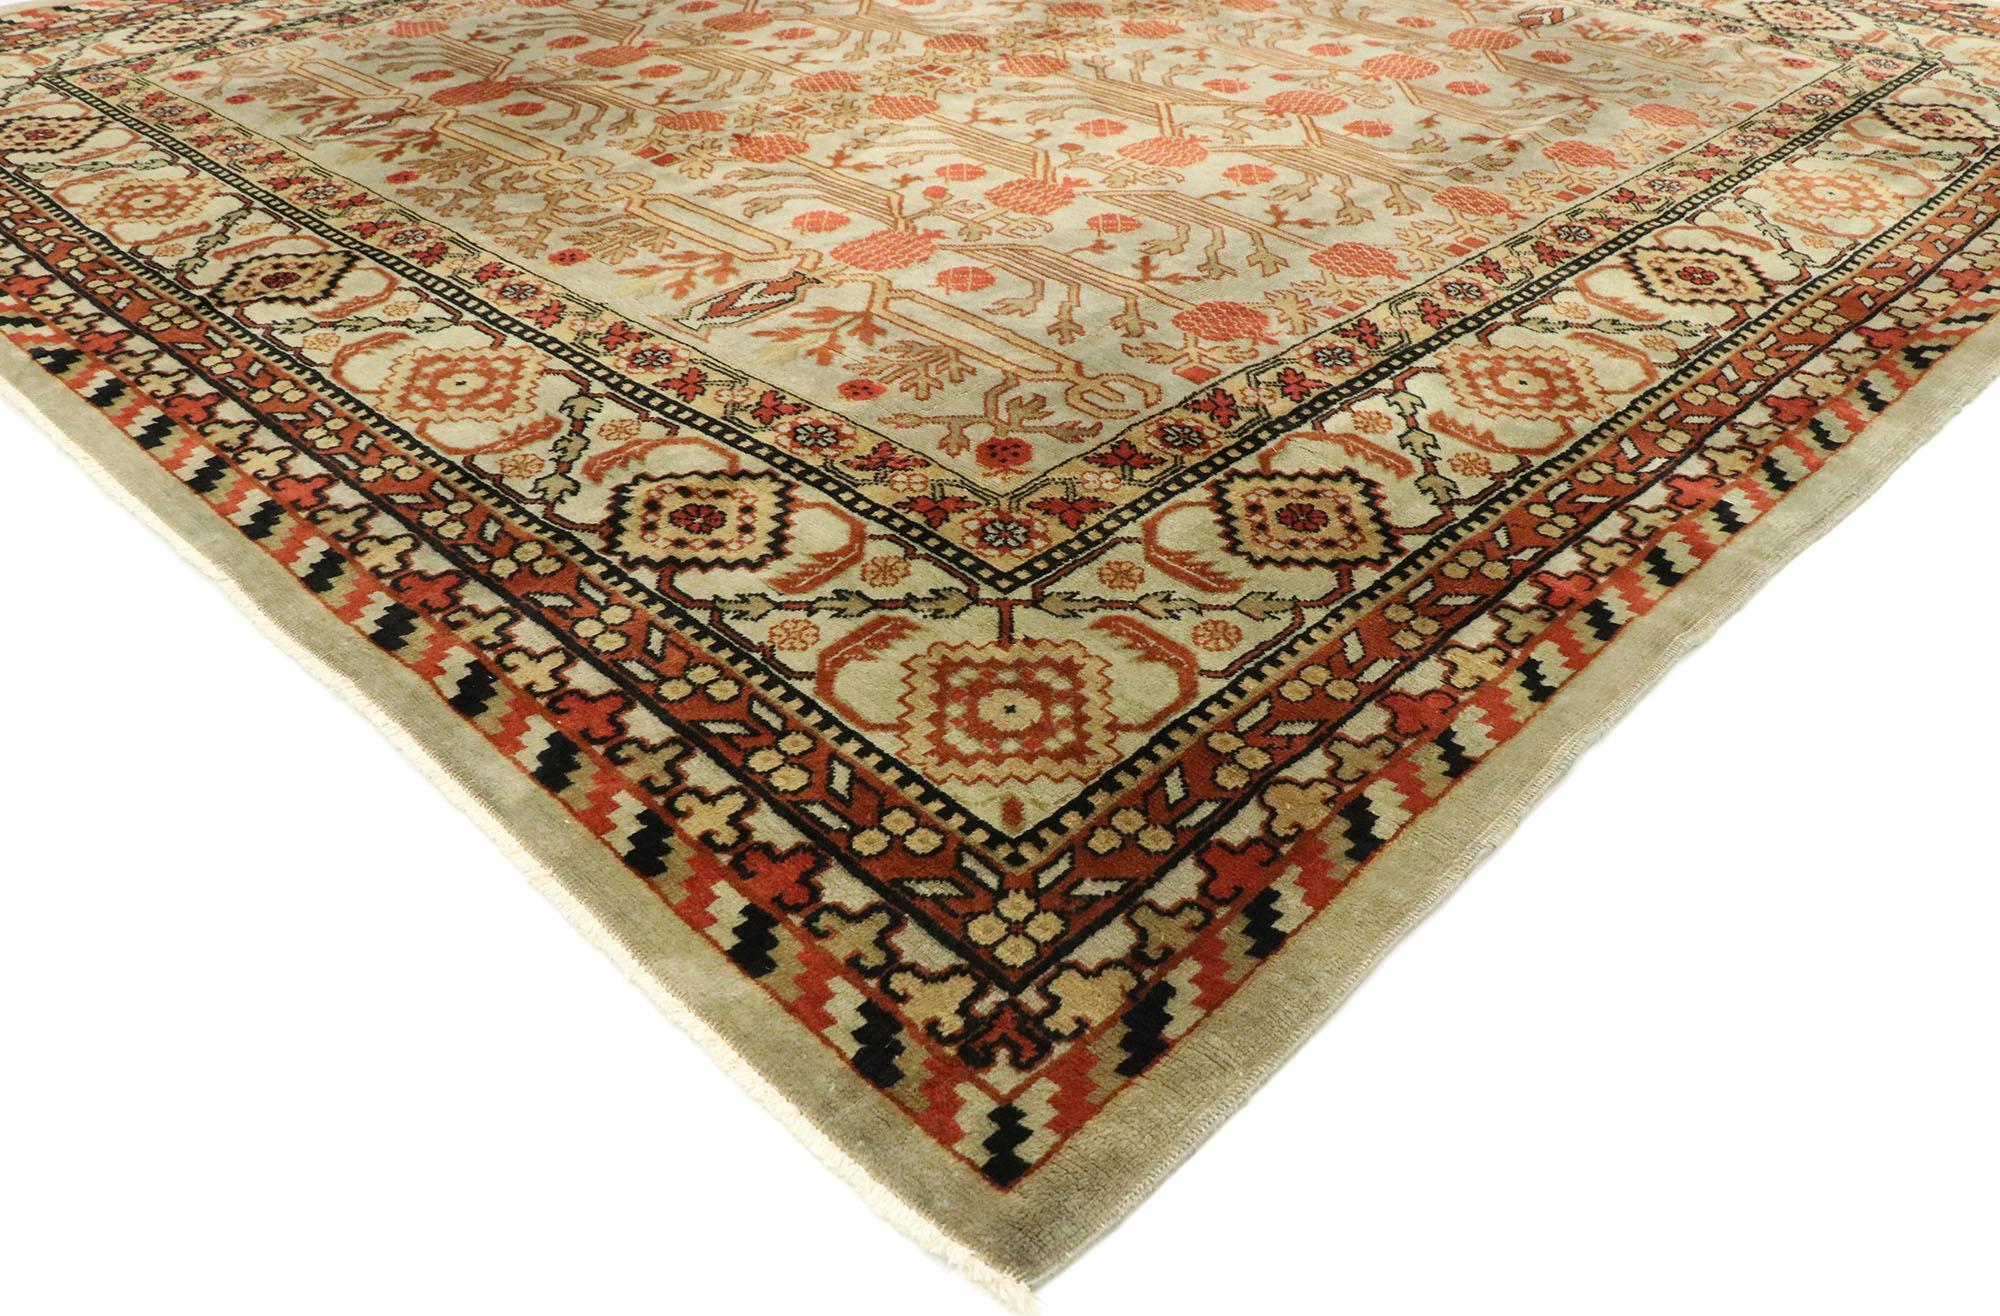 53031, vintage Yerevan Khotan rug with Pomegranate Design. Blending elements from the modern world with rustic sensibility, this hand knotted wool vintage Yerevan Khotan rug will boost the coziness factor in nearly any space. The abrashed field is